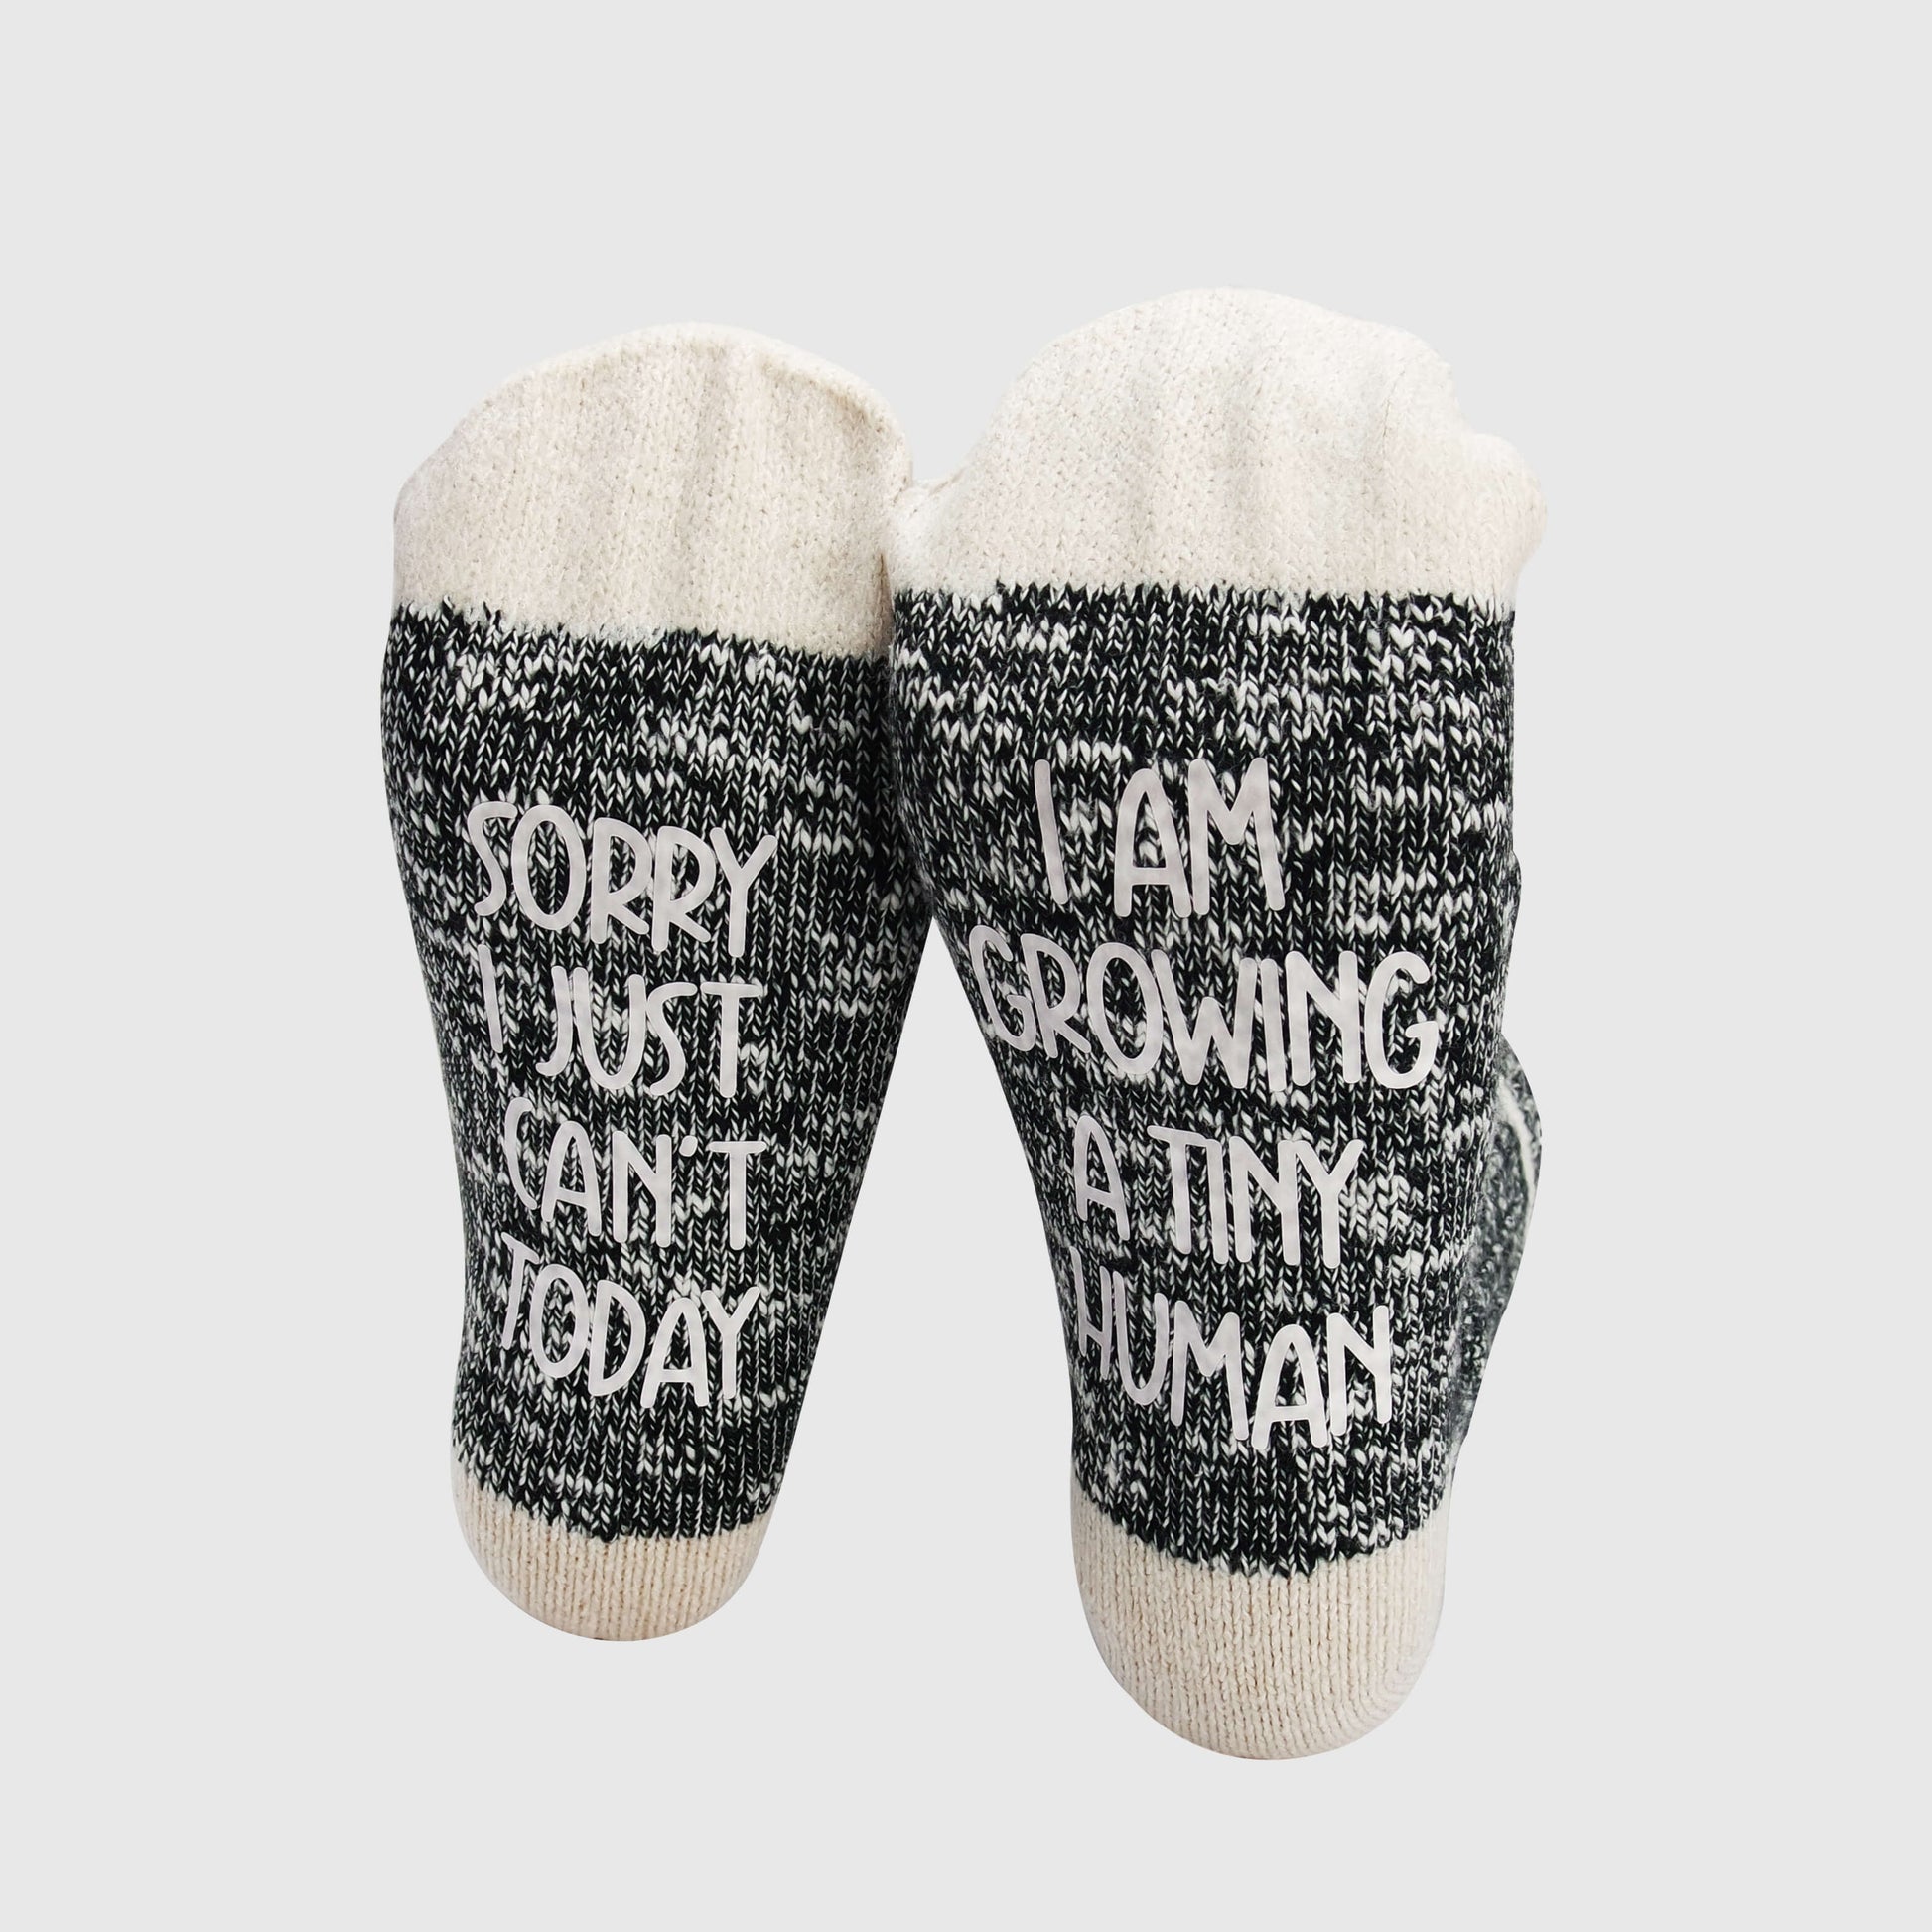 Socks with a lighthearted message for expectant mothers, reflecting the realities of pregnancy with the phrase 'Sorry I just can't today, I am growing a tiny human